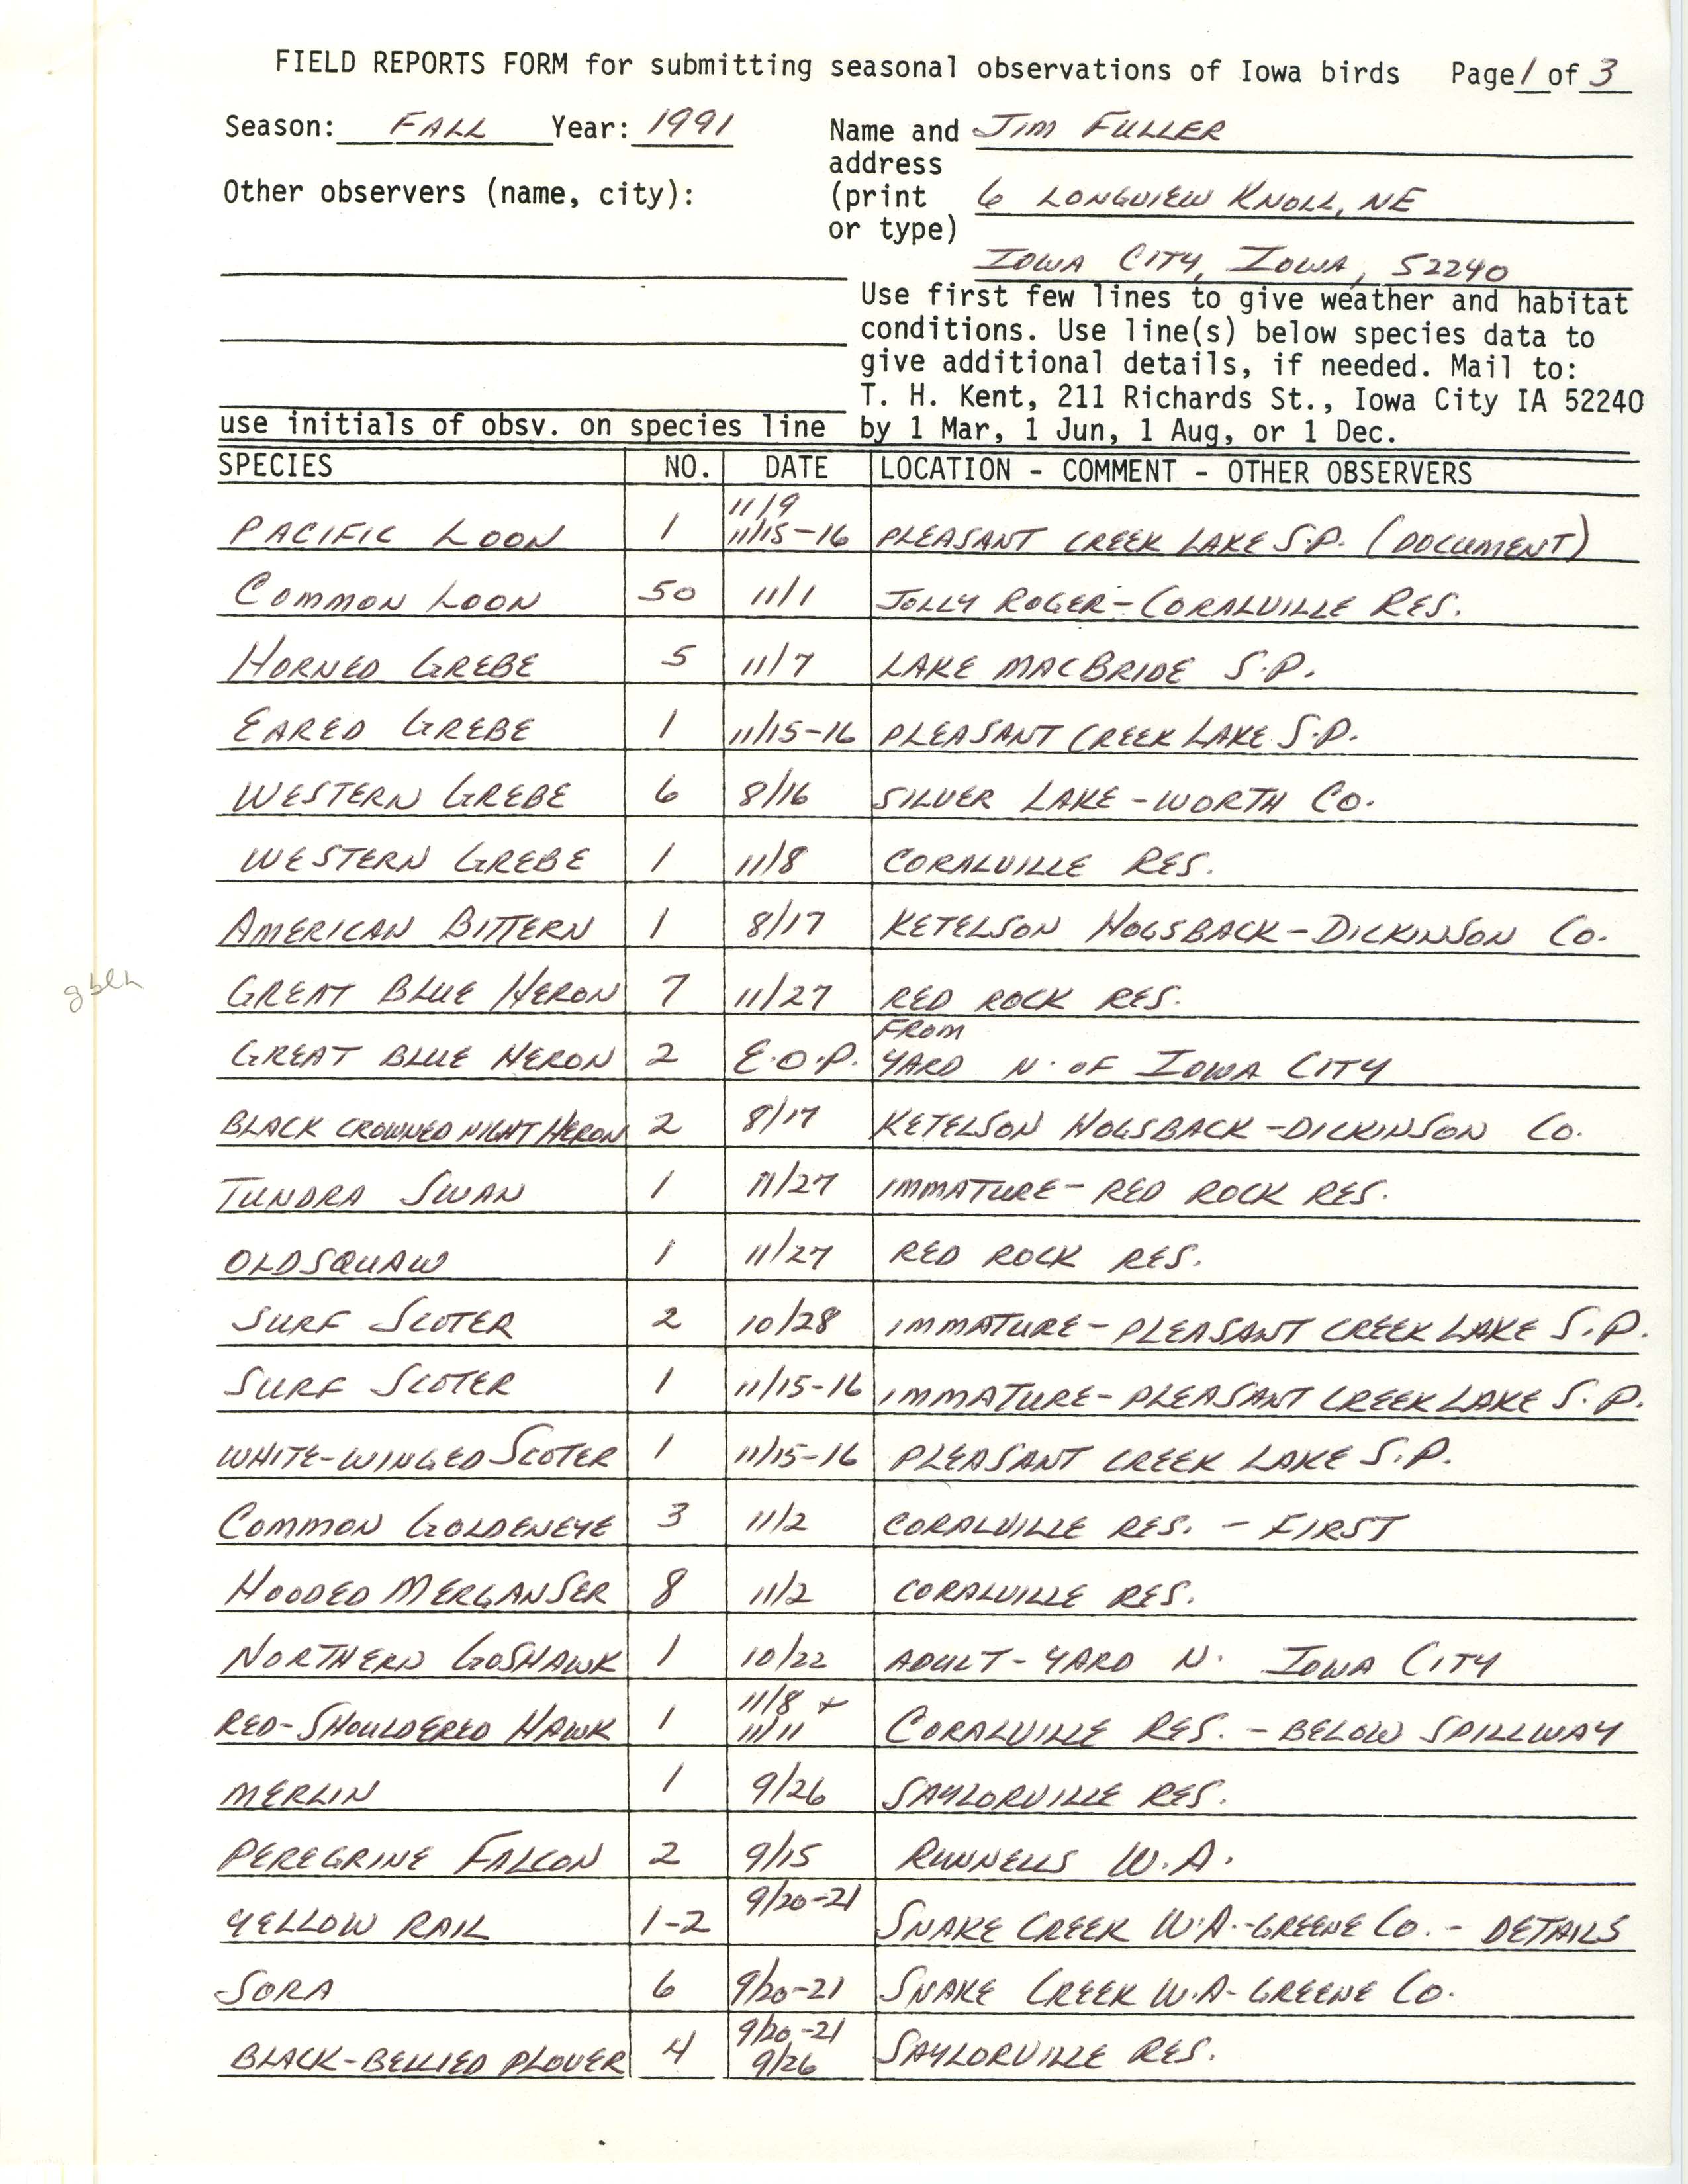 Field reports form for submitting seasonal observations of Iowa birds, James L. Fuller, fall 1991